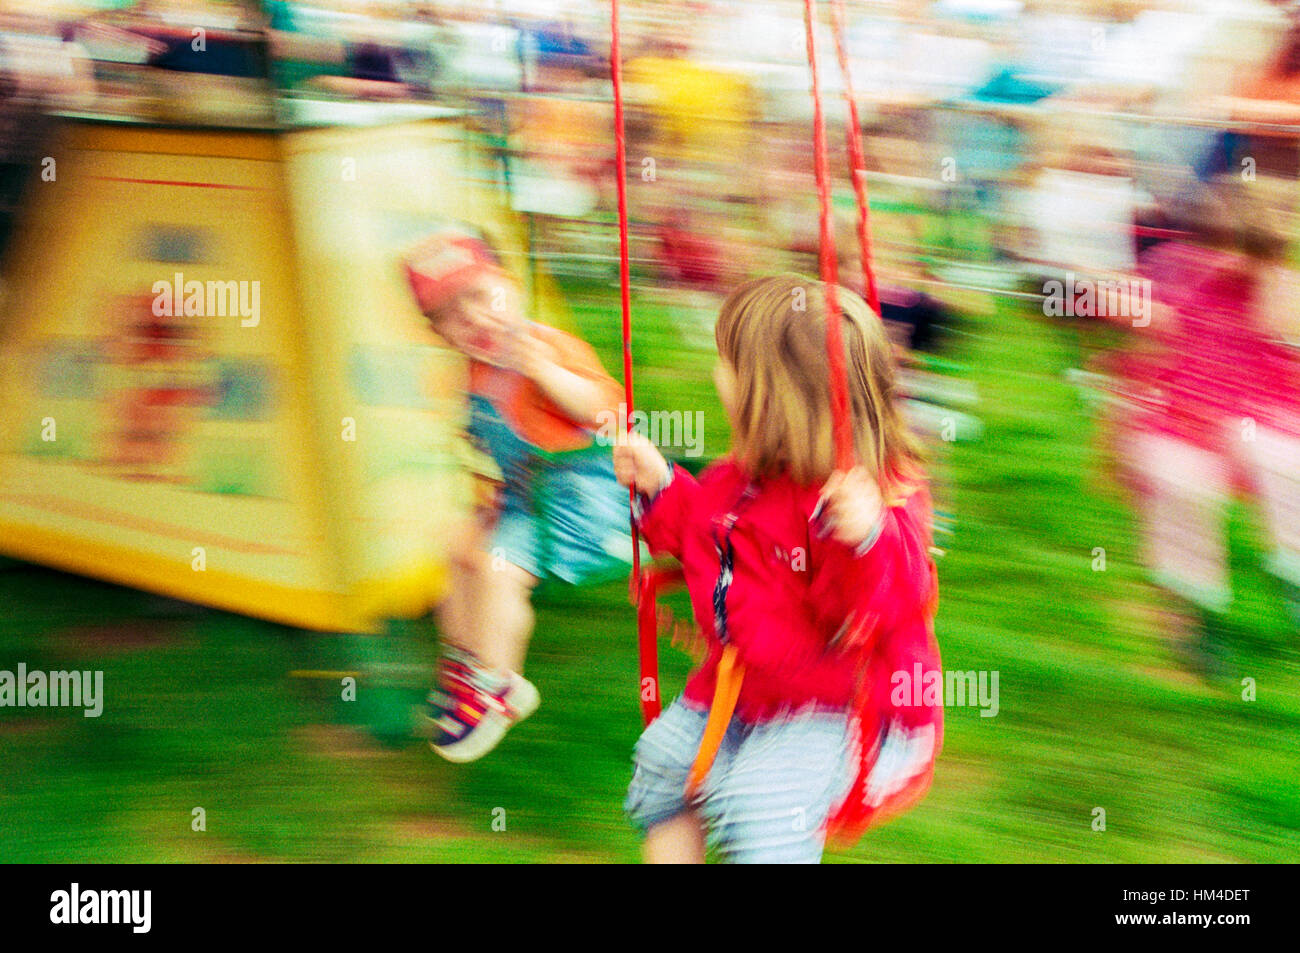 An abstract of children on a fairground ride with motion blur. Stock Photo